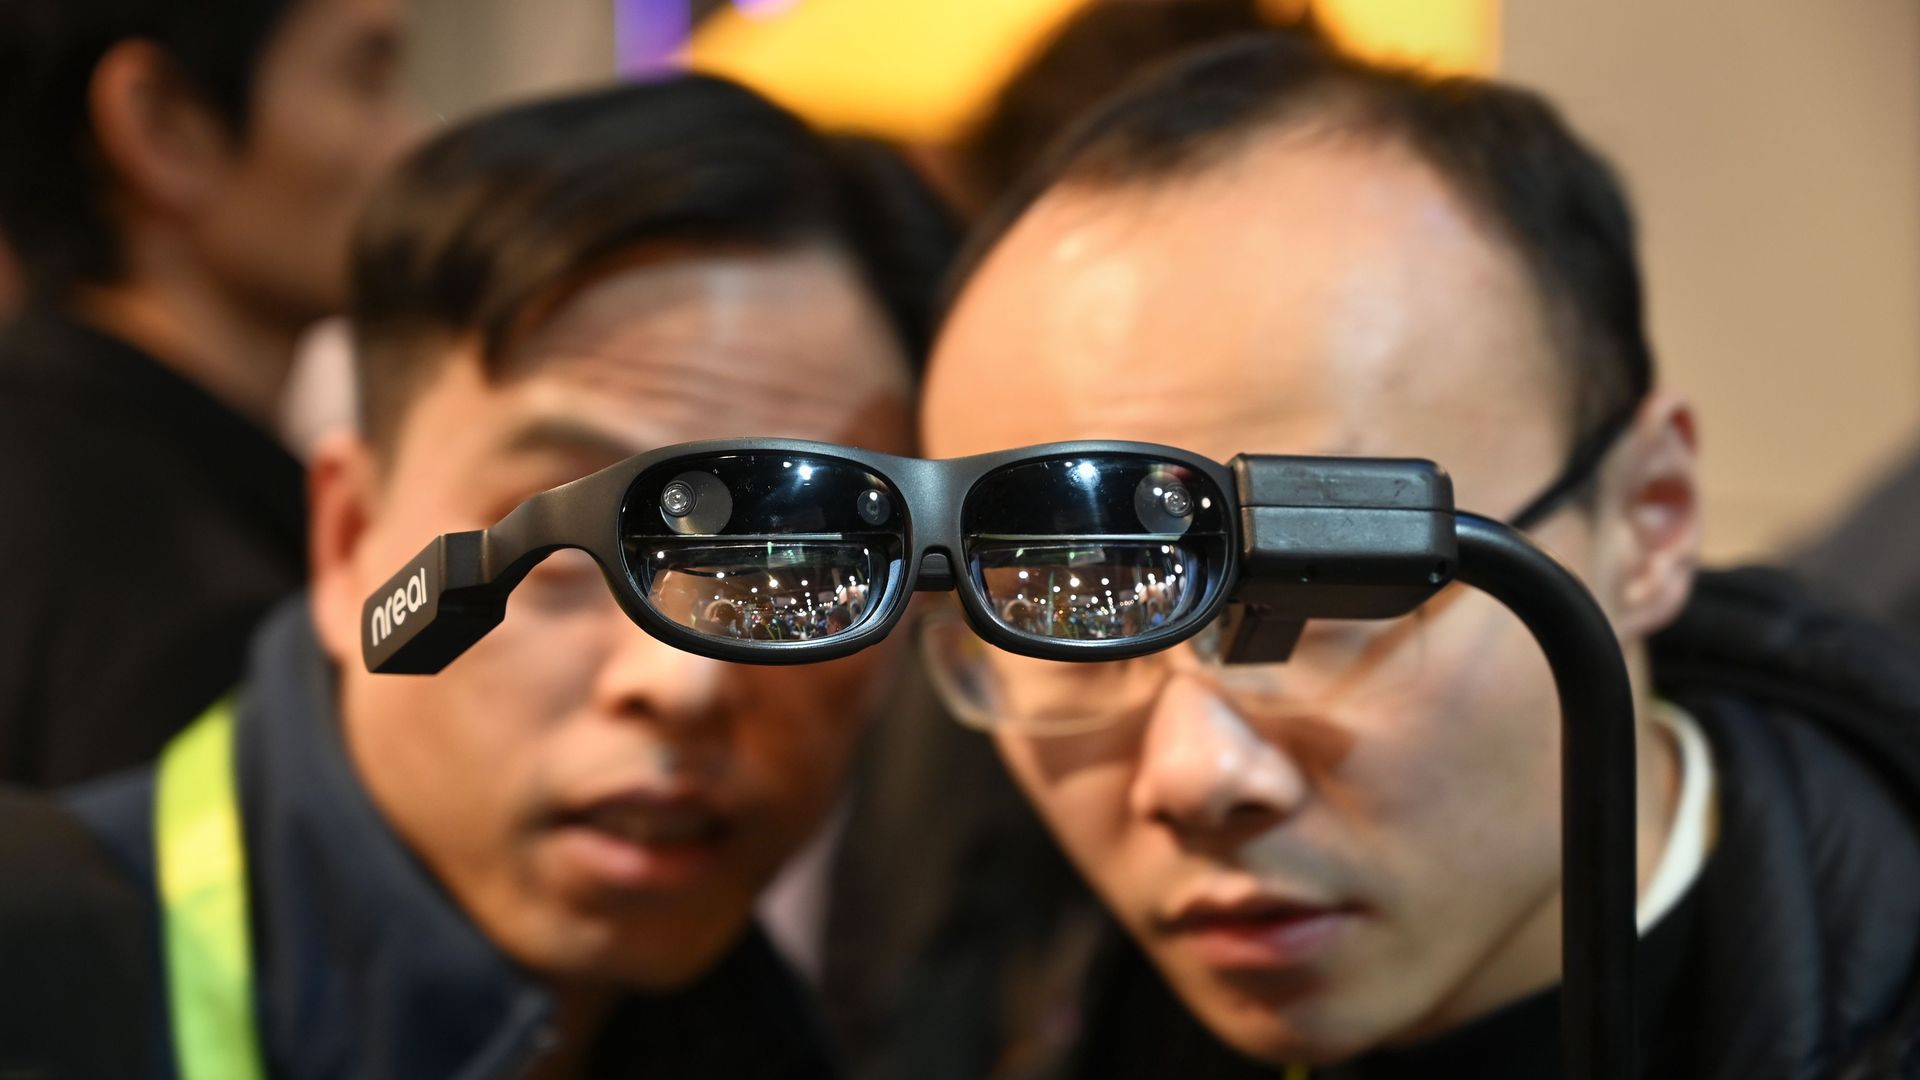 NReal augmented reality (AR) glasses, on the last day of CES 2019,